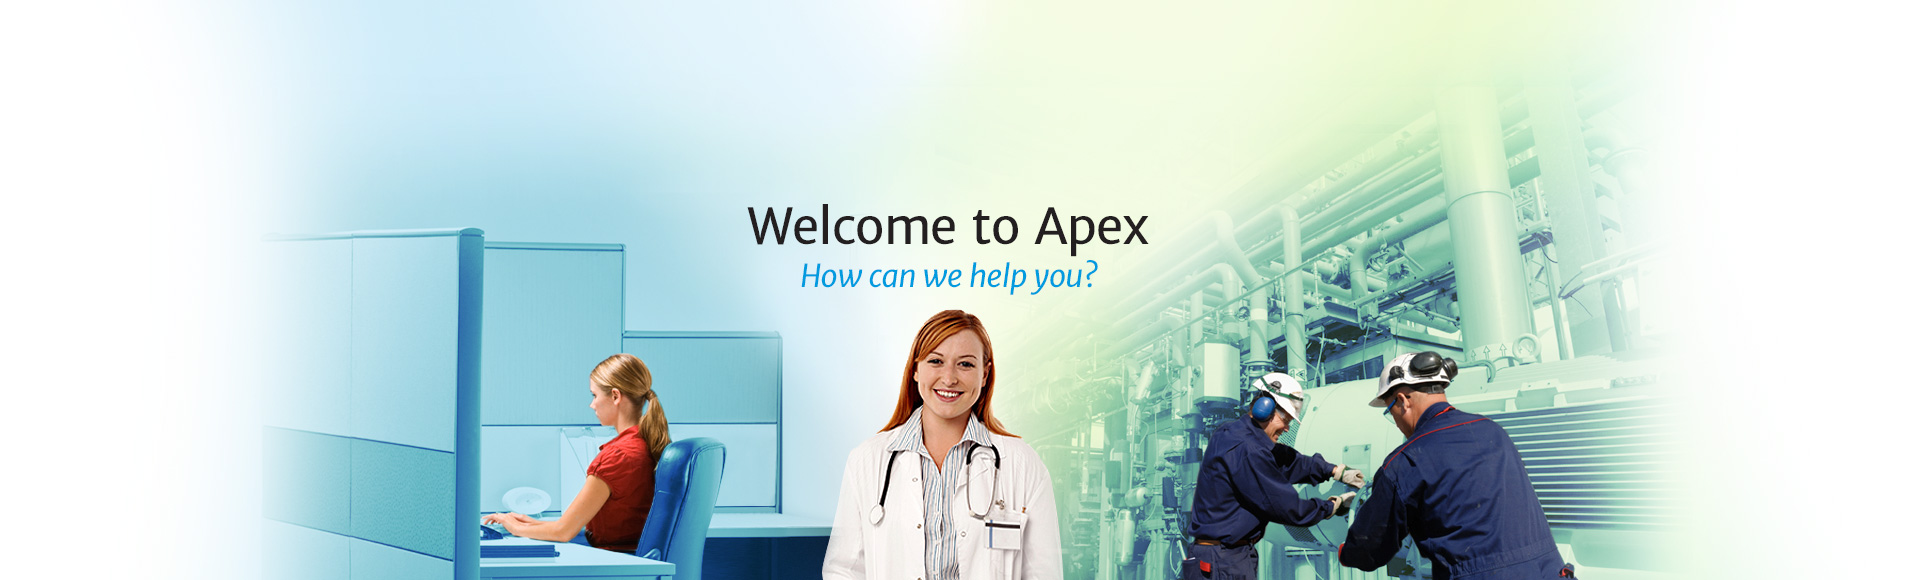 Apex Occupational Health and Wellness, Kitchener Ontario